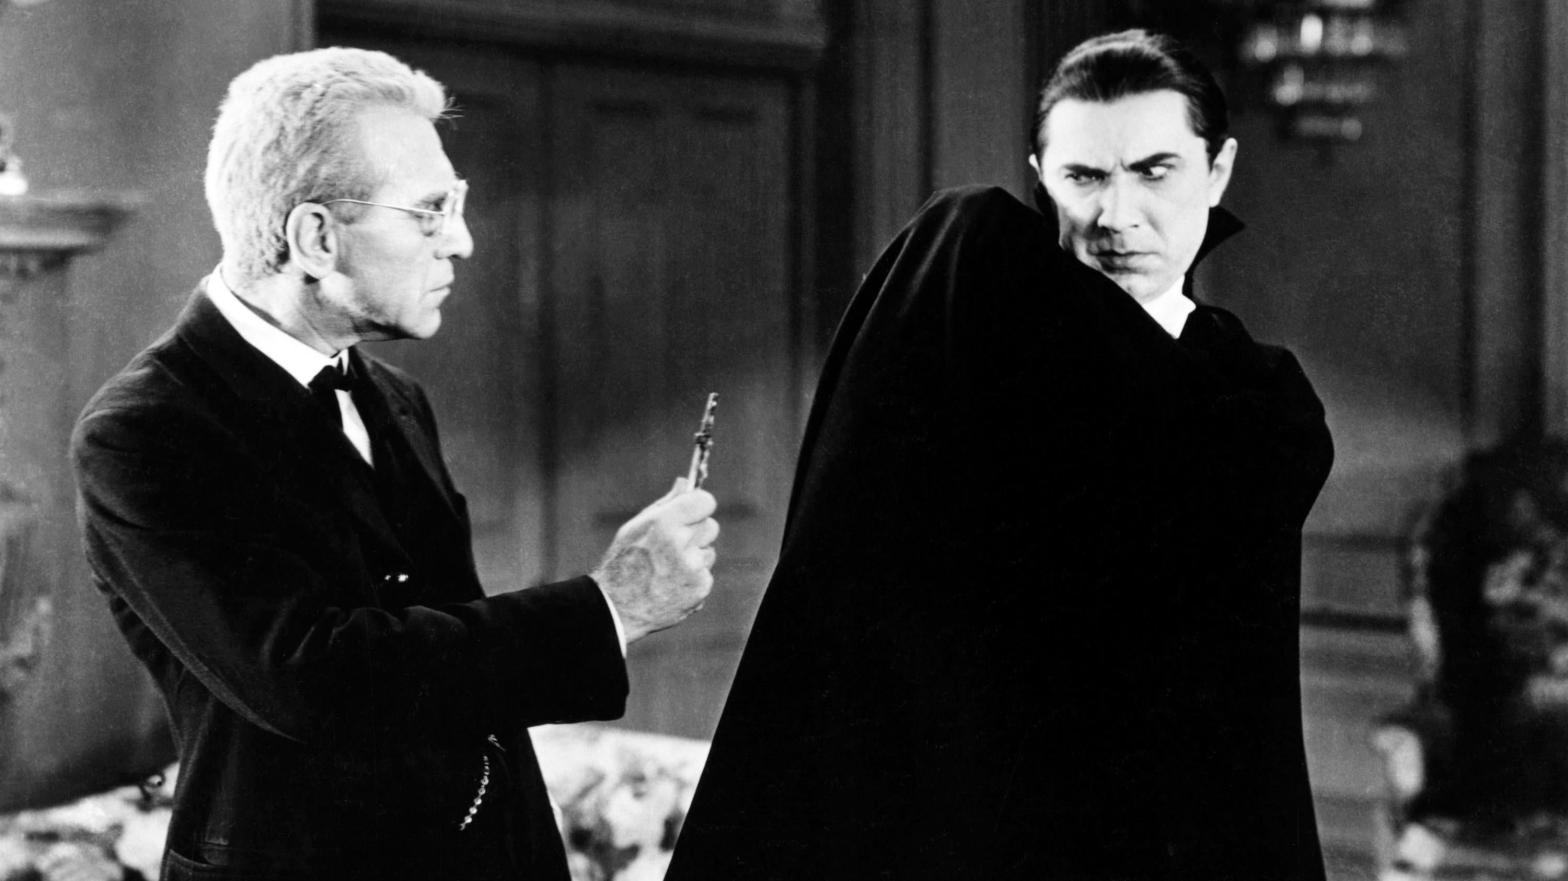 Dr. Van Helsing (Edward Van Sloan) gets a reaction out of Count Dracula (Bela Lugosi) in by Tod Browning's 1931 Dracula. (Photo: Silver Screen Collection, Getty Images)